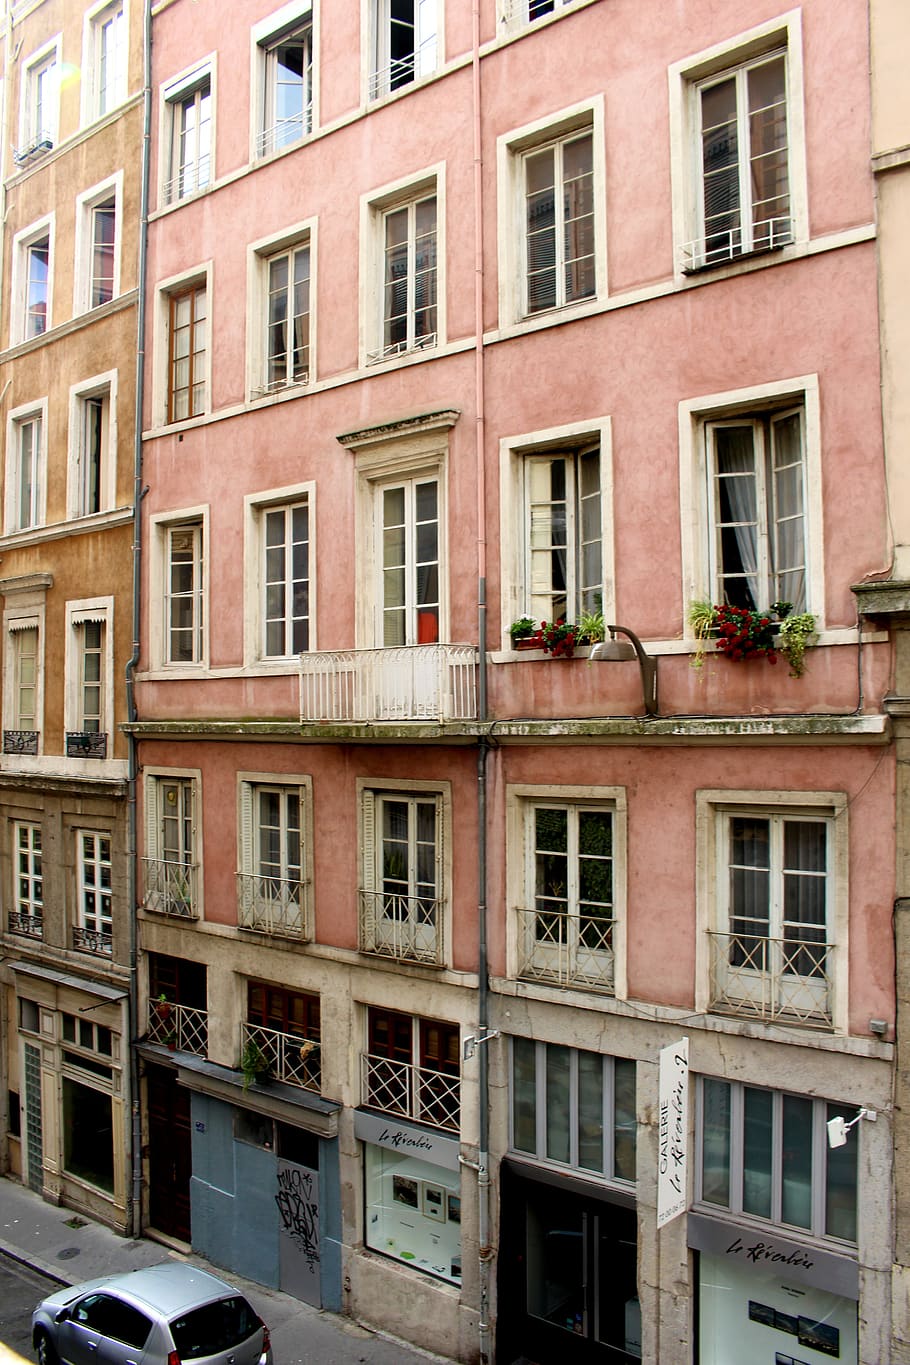 lyon, france, window, architecture, city, historically, building